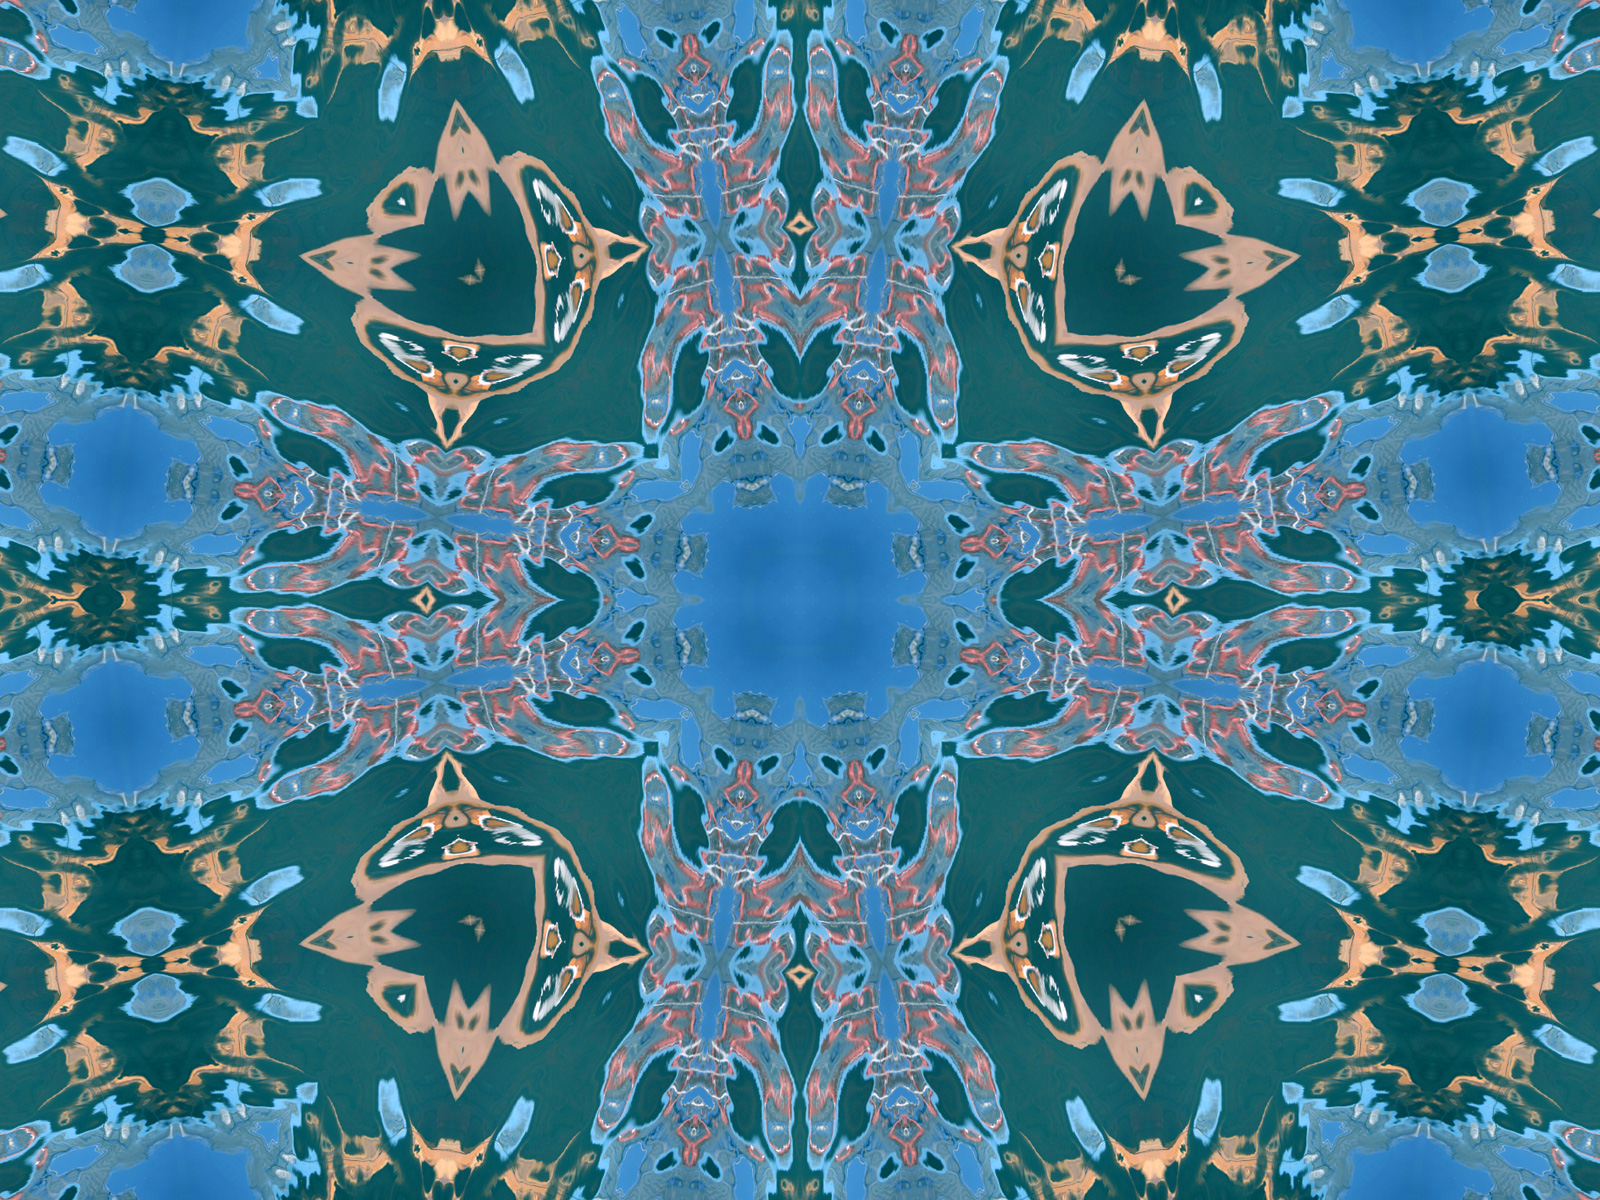 Abstract pattern in blue and dark green